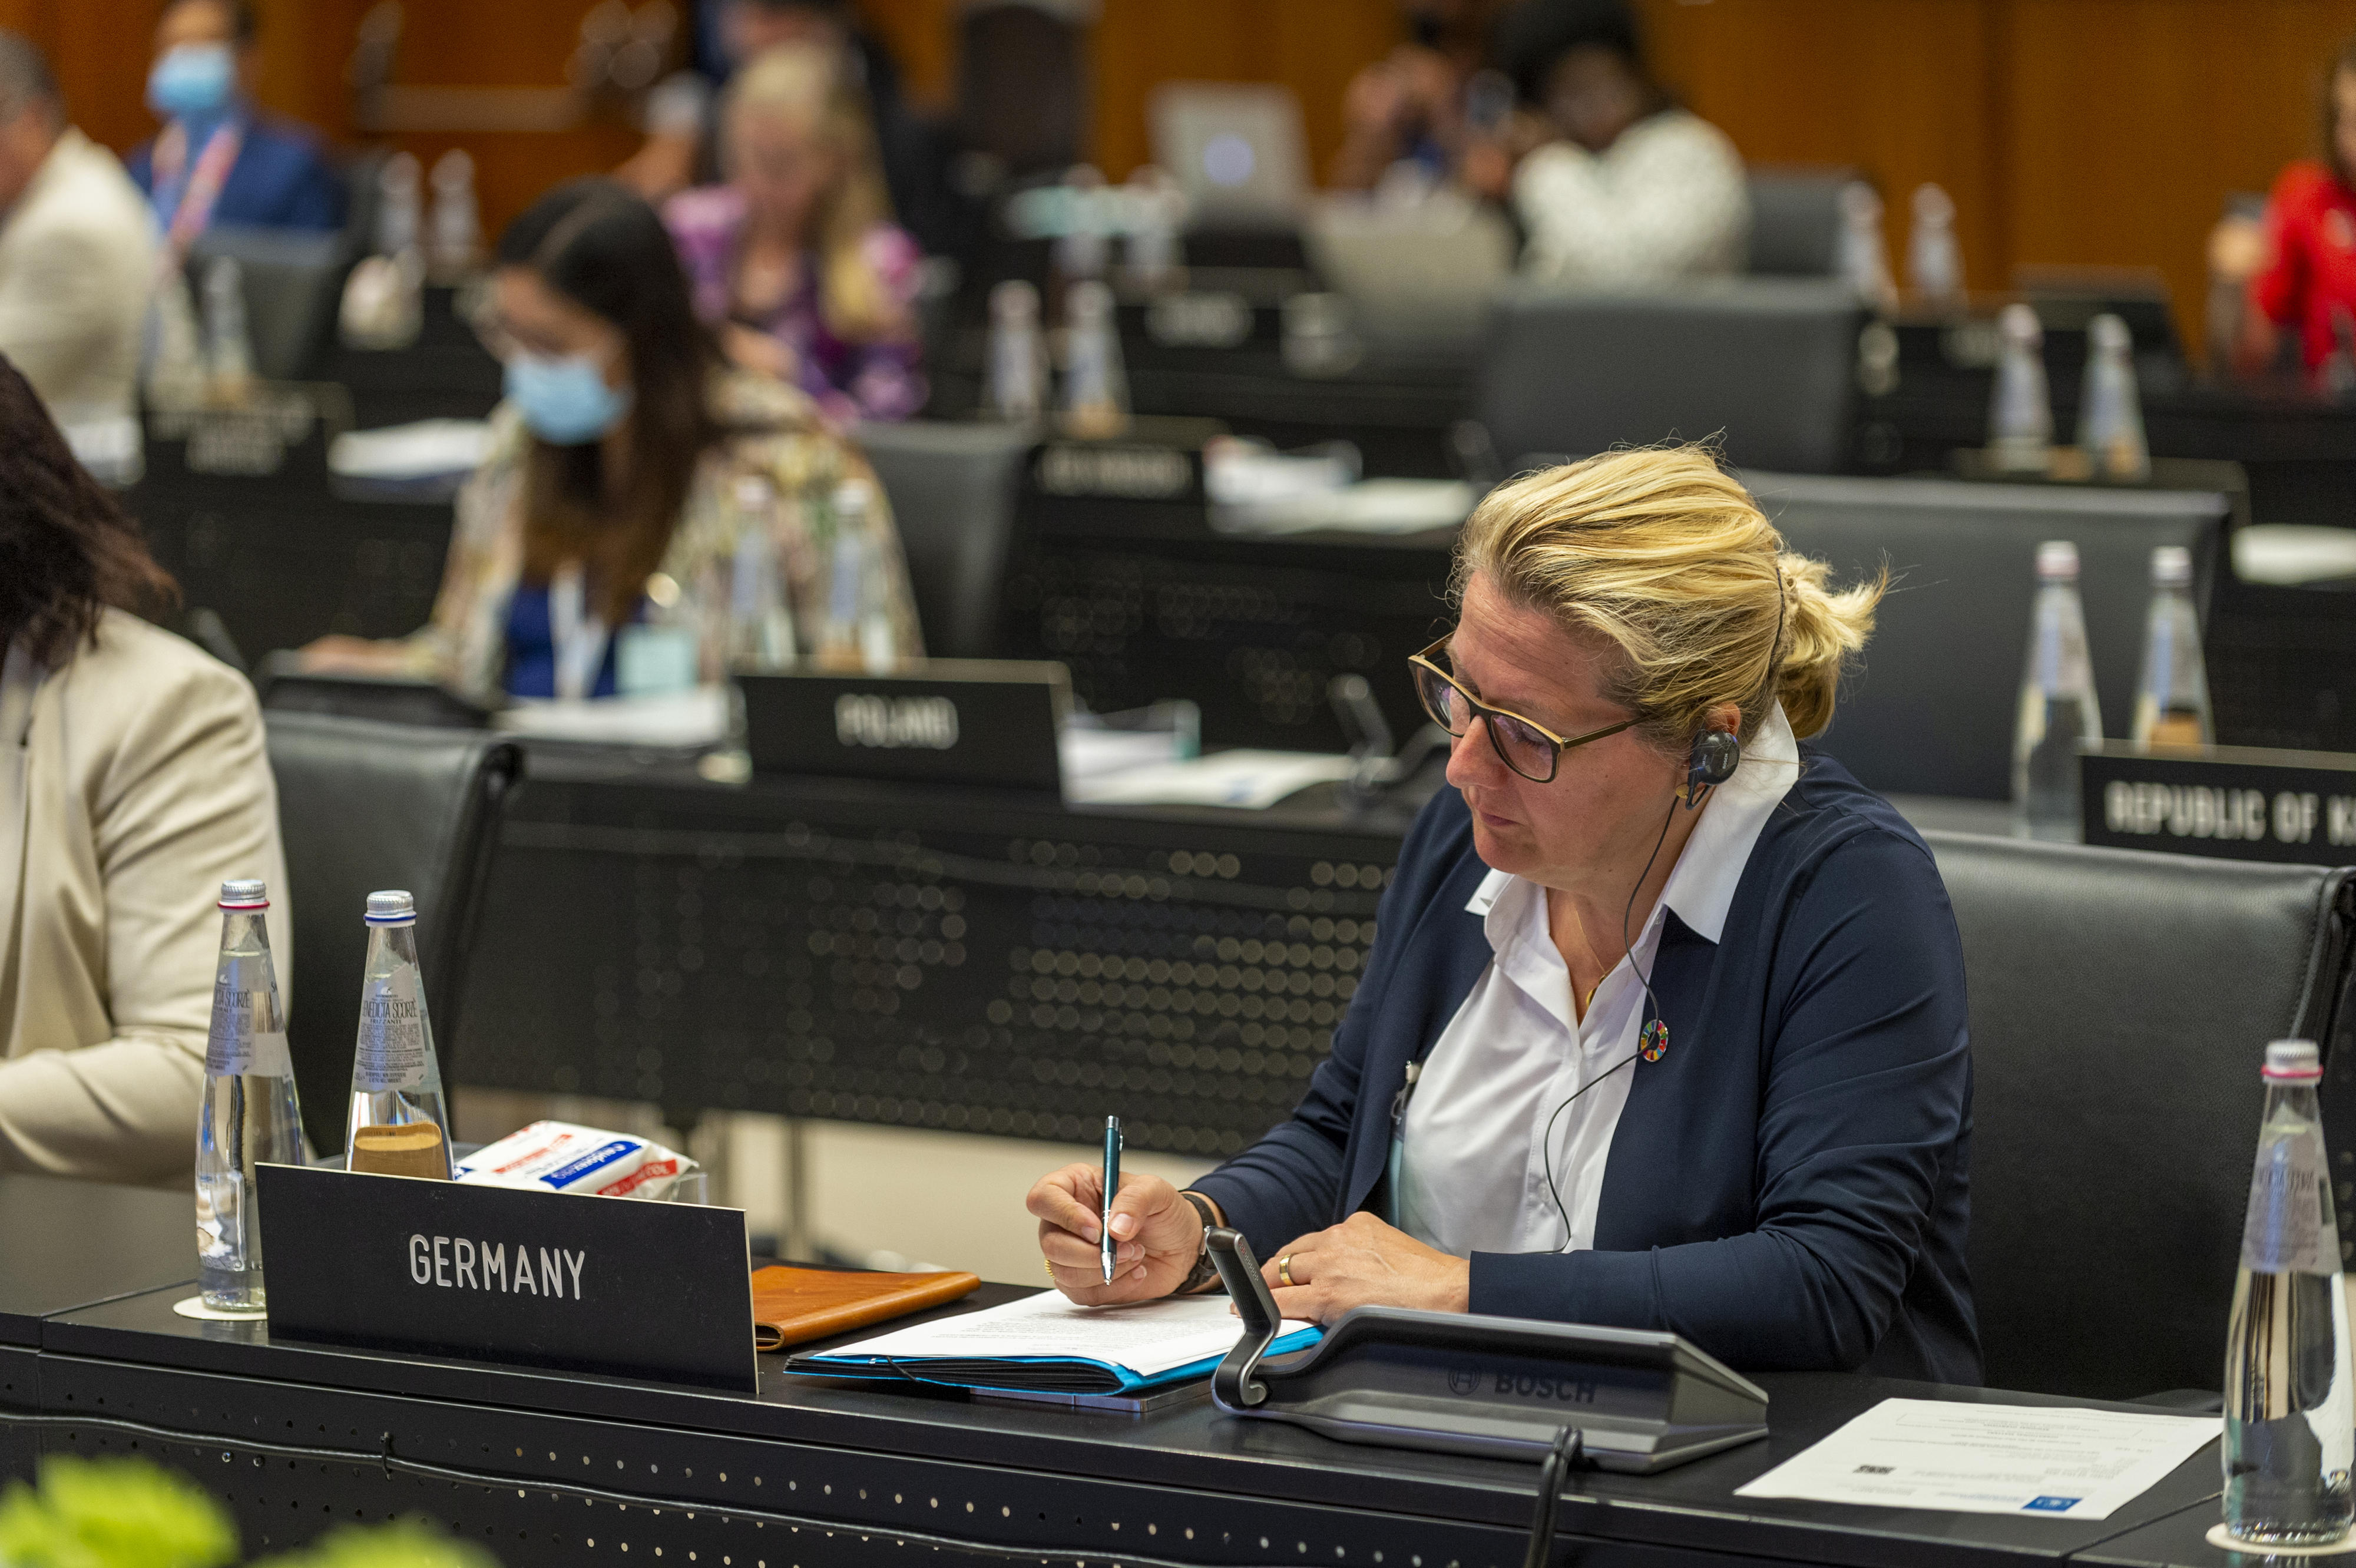 Development Minister Svenja Schulze at the annual meeting of the Executive Board of the UN World Food Programme (WFP) in Rome in June 2022